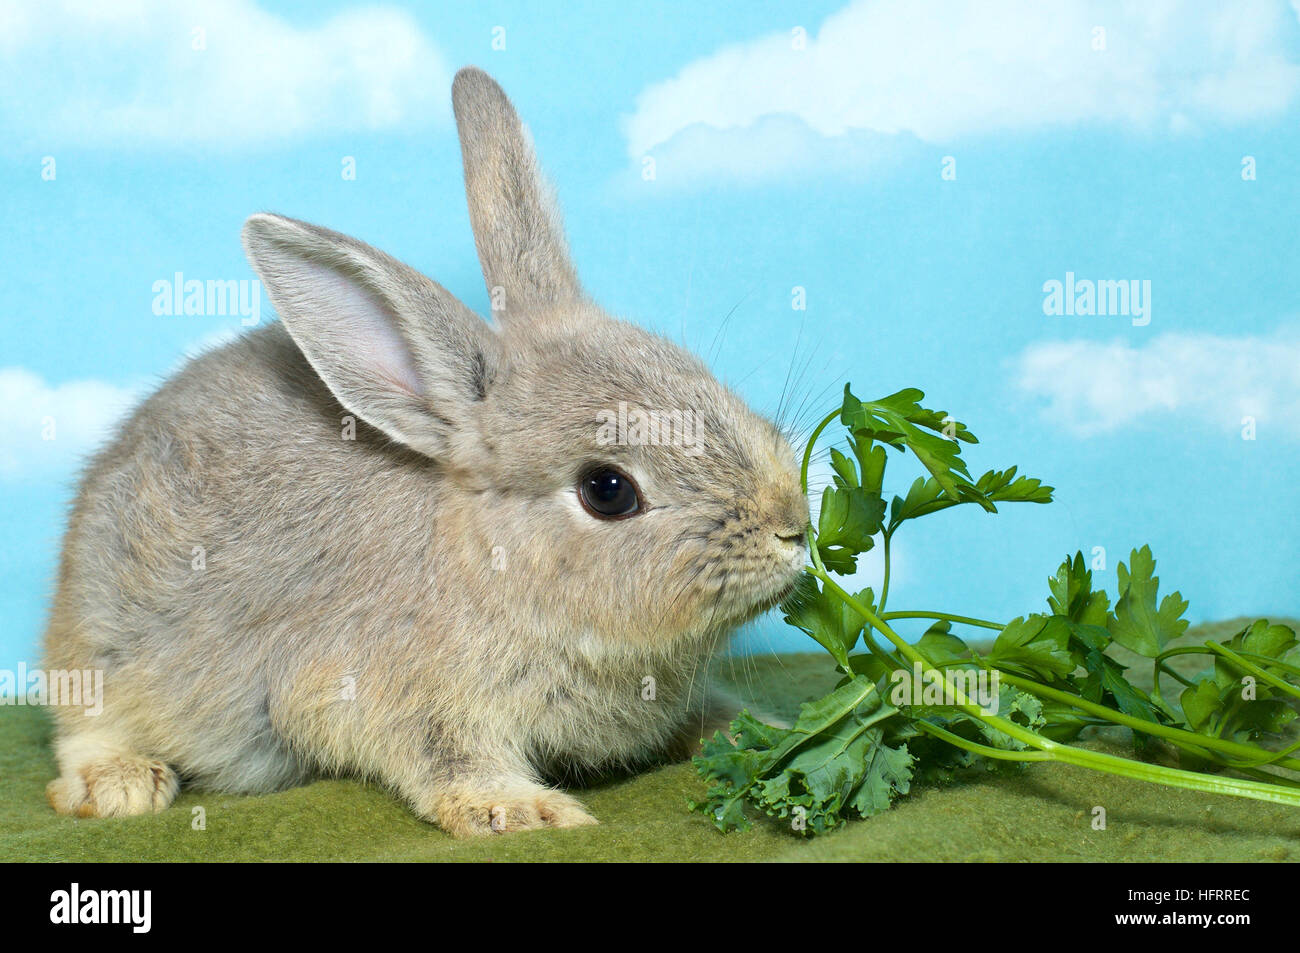 Netherland Dwarf rabbit on a green blanket eating vegetable greens, blue background with clouds Stock Photo